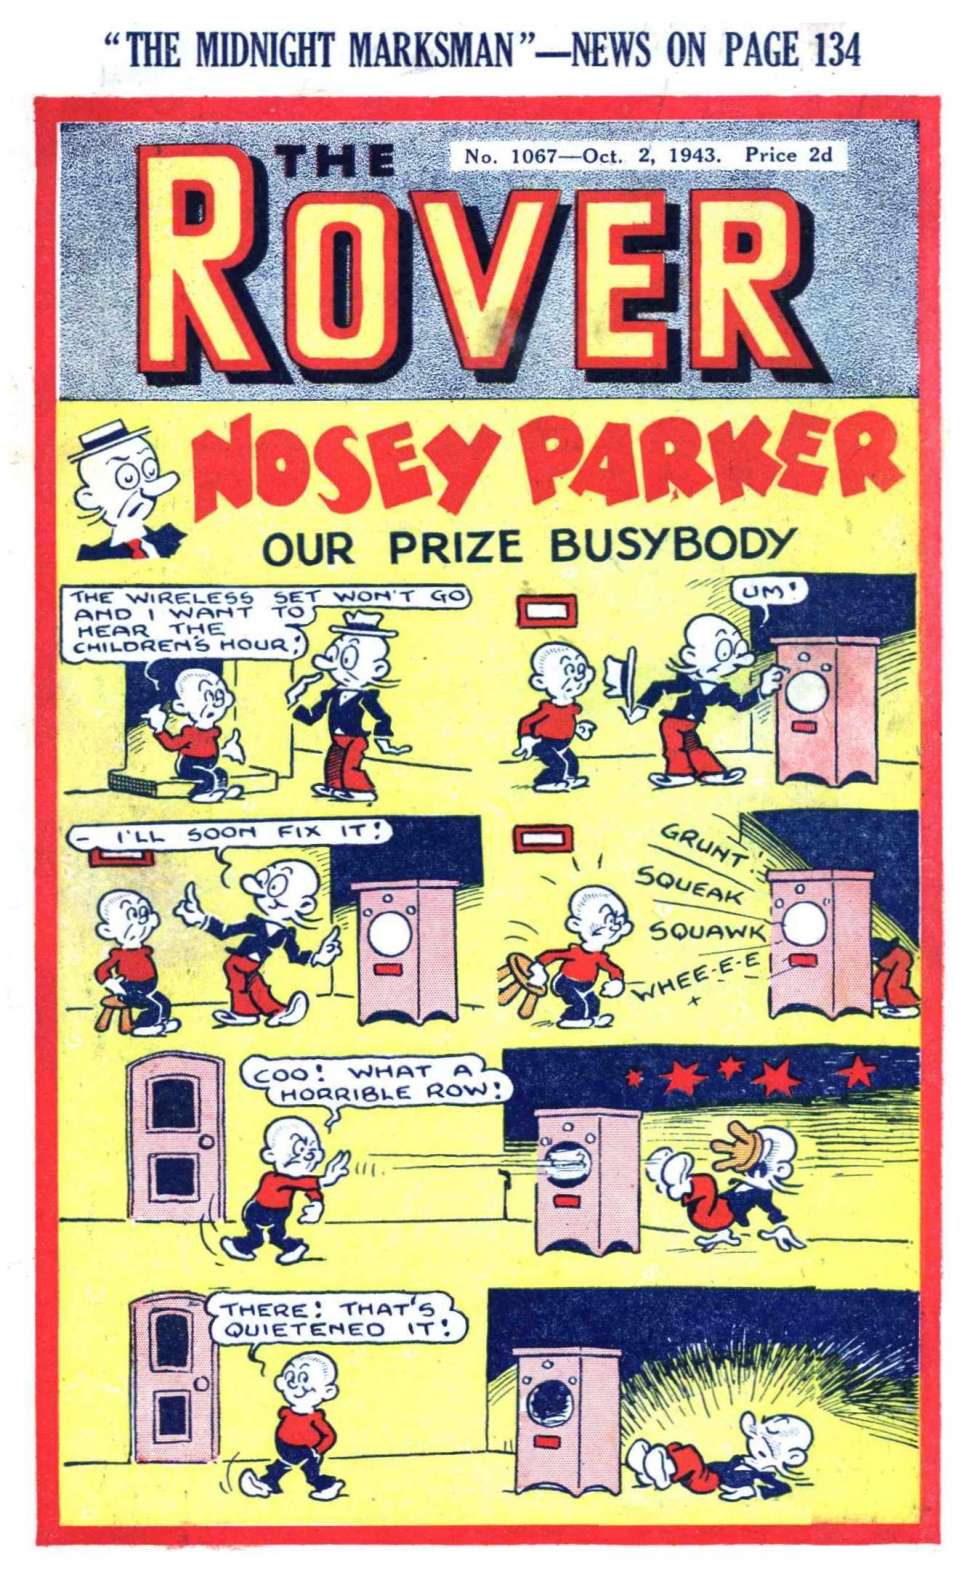 Book Cover For The Rover 1067